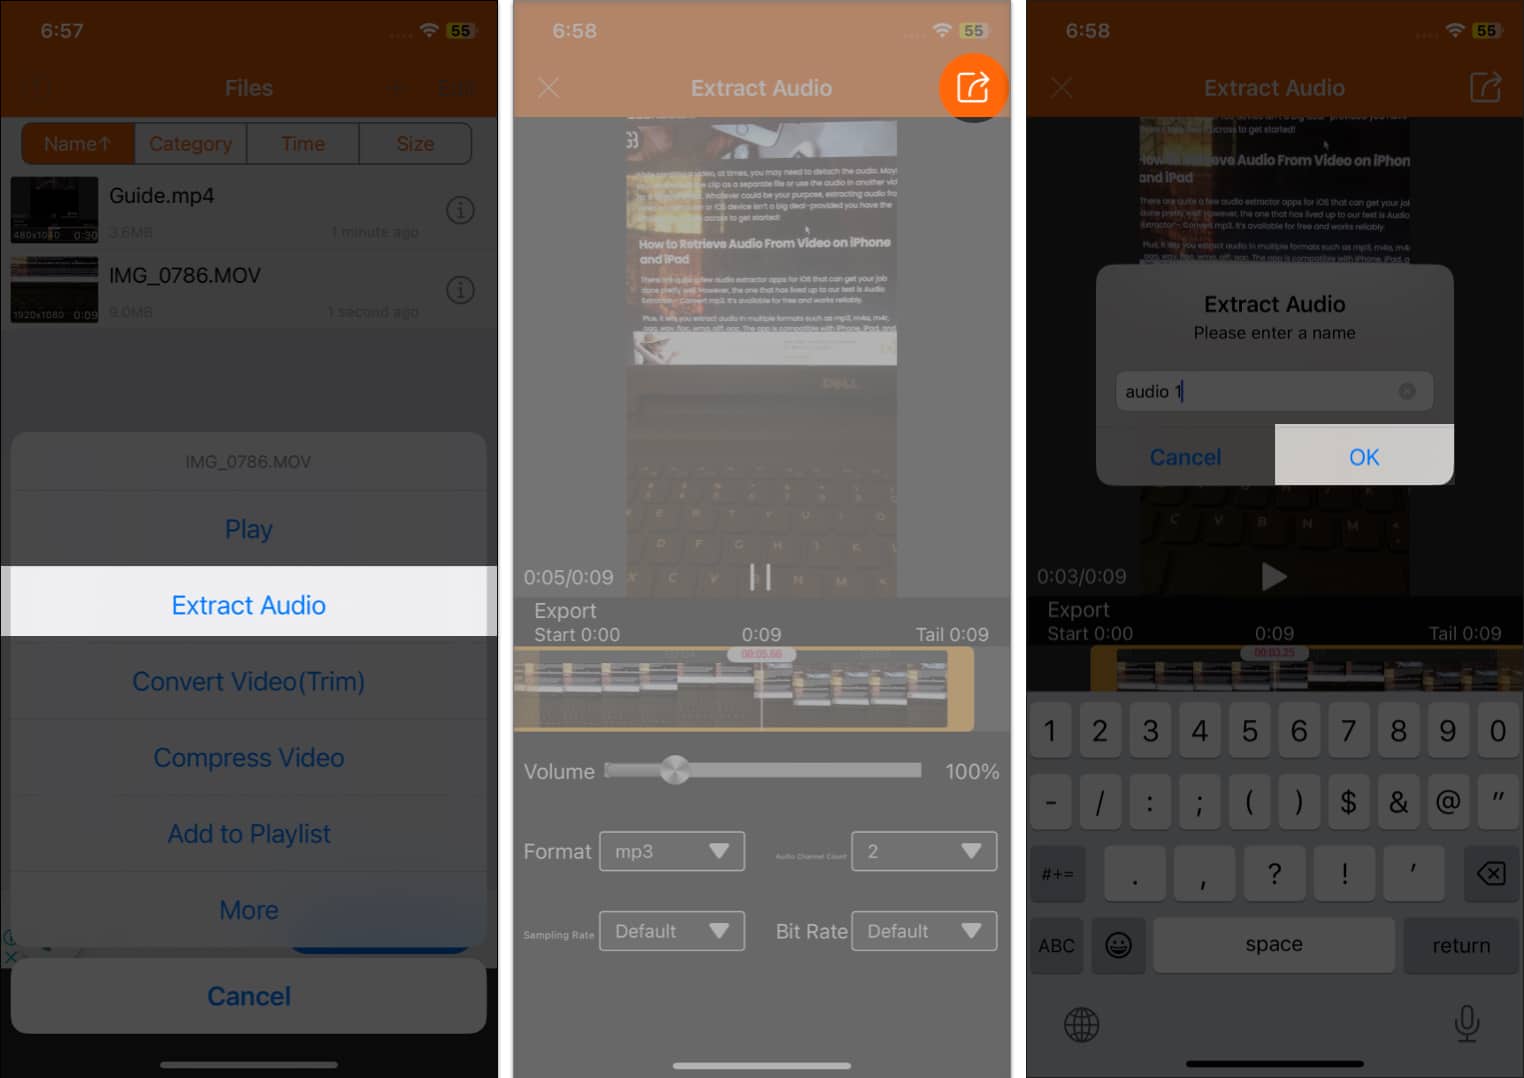 Select Extract Audio, tap export icon, rename file, and tap Ok